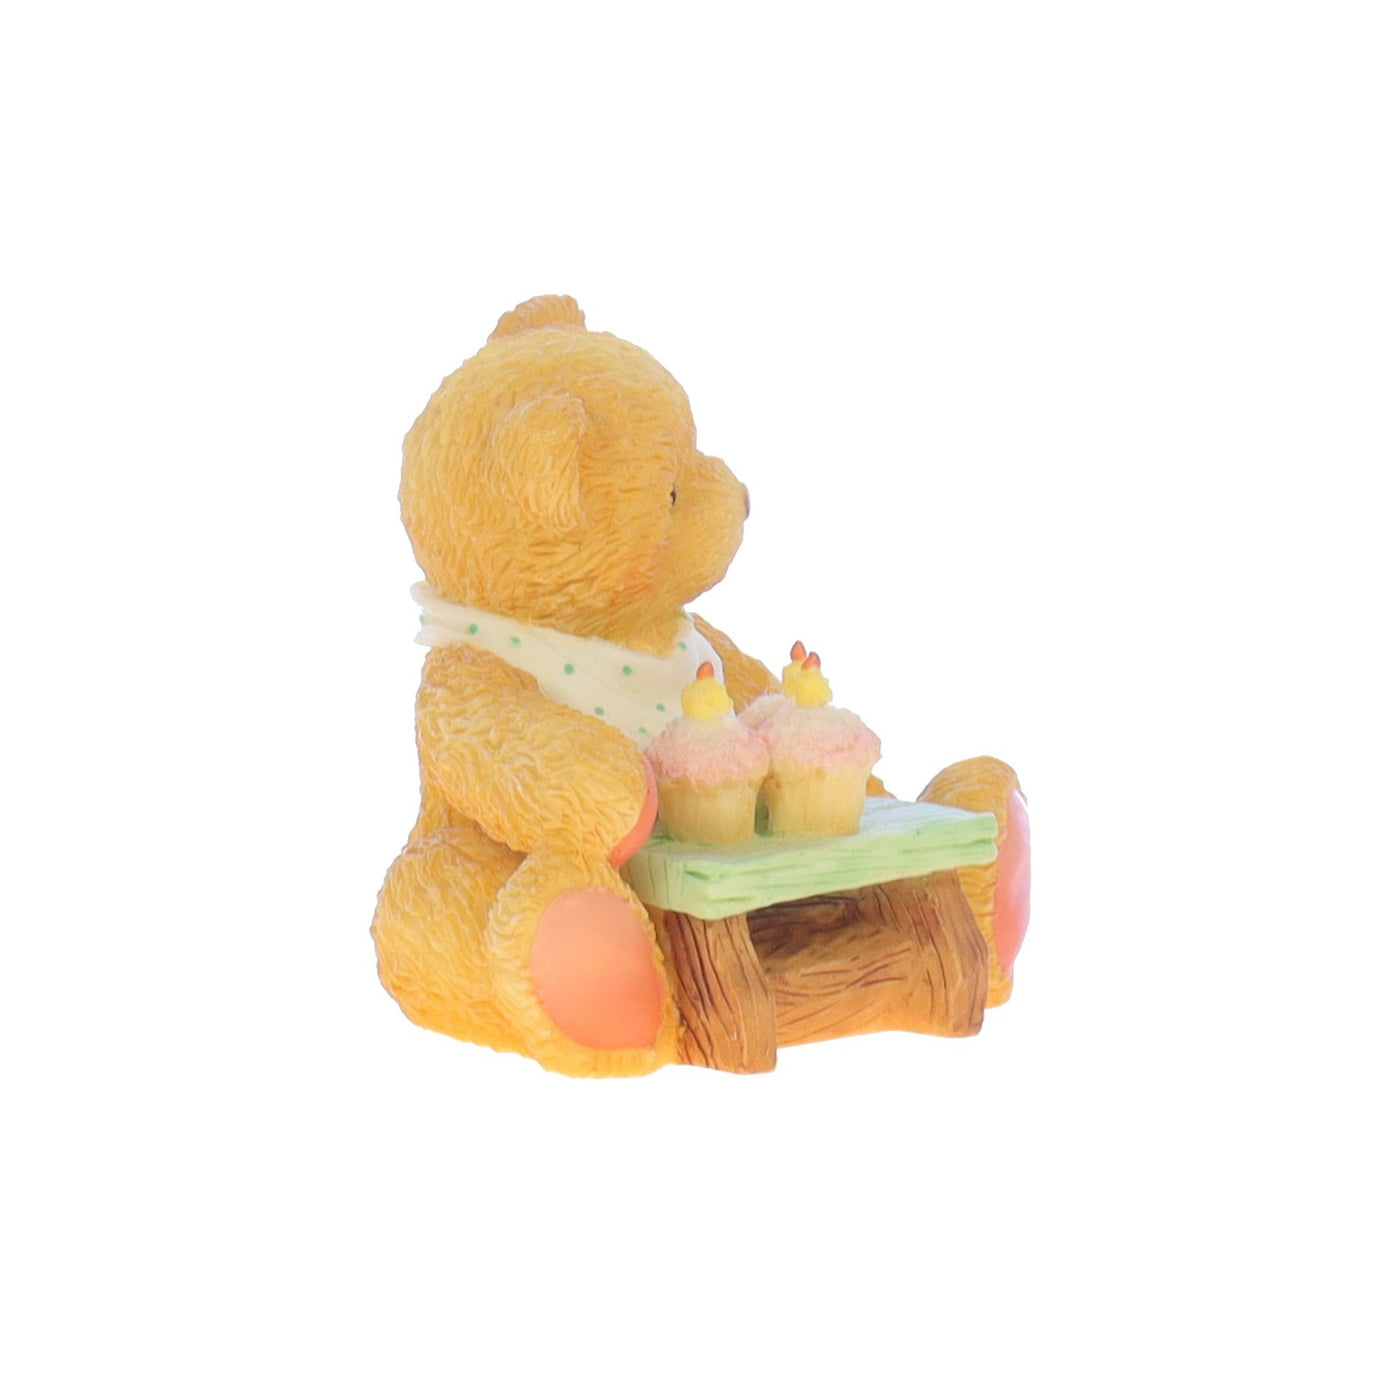 Cherished Teddies by Priscilla Hillman Resin Figurine Age 3Three Cheers For You_